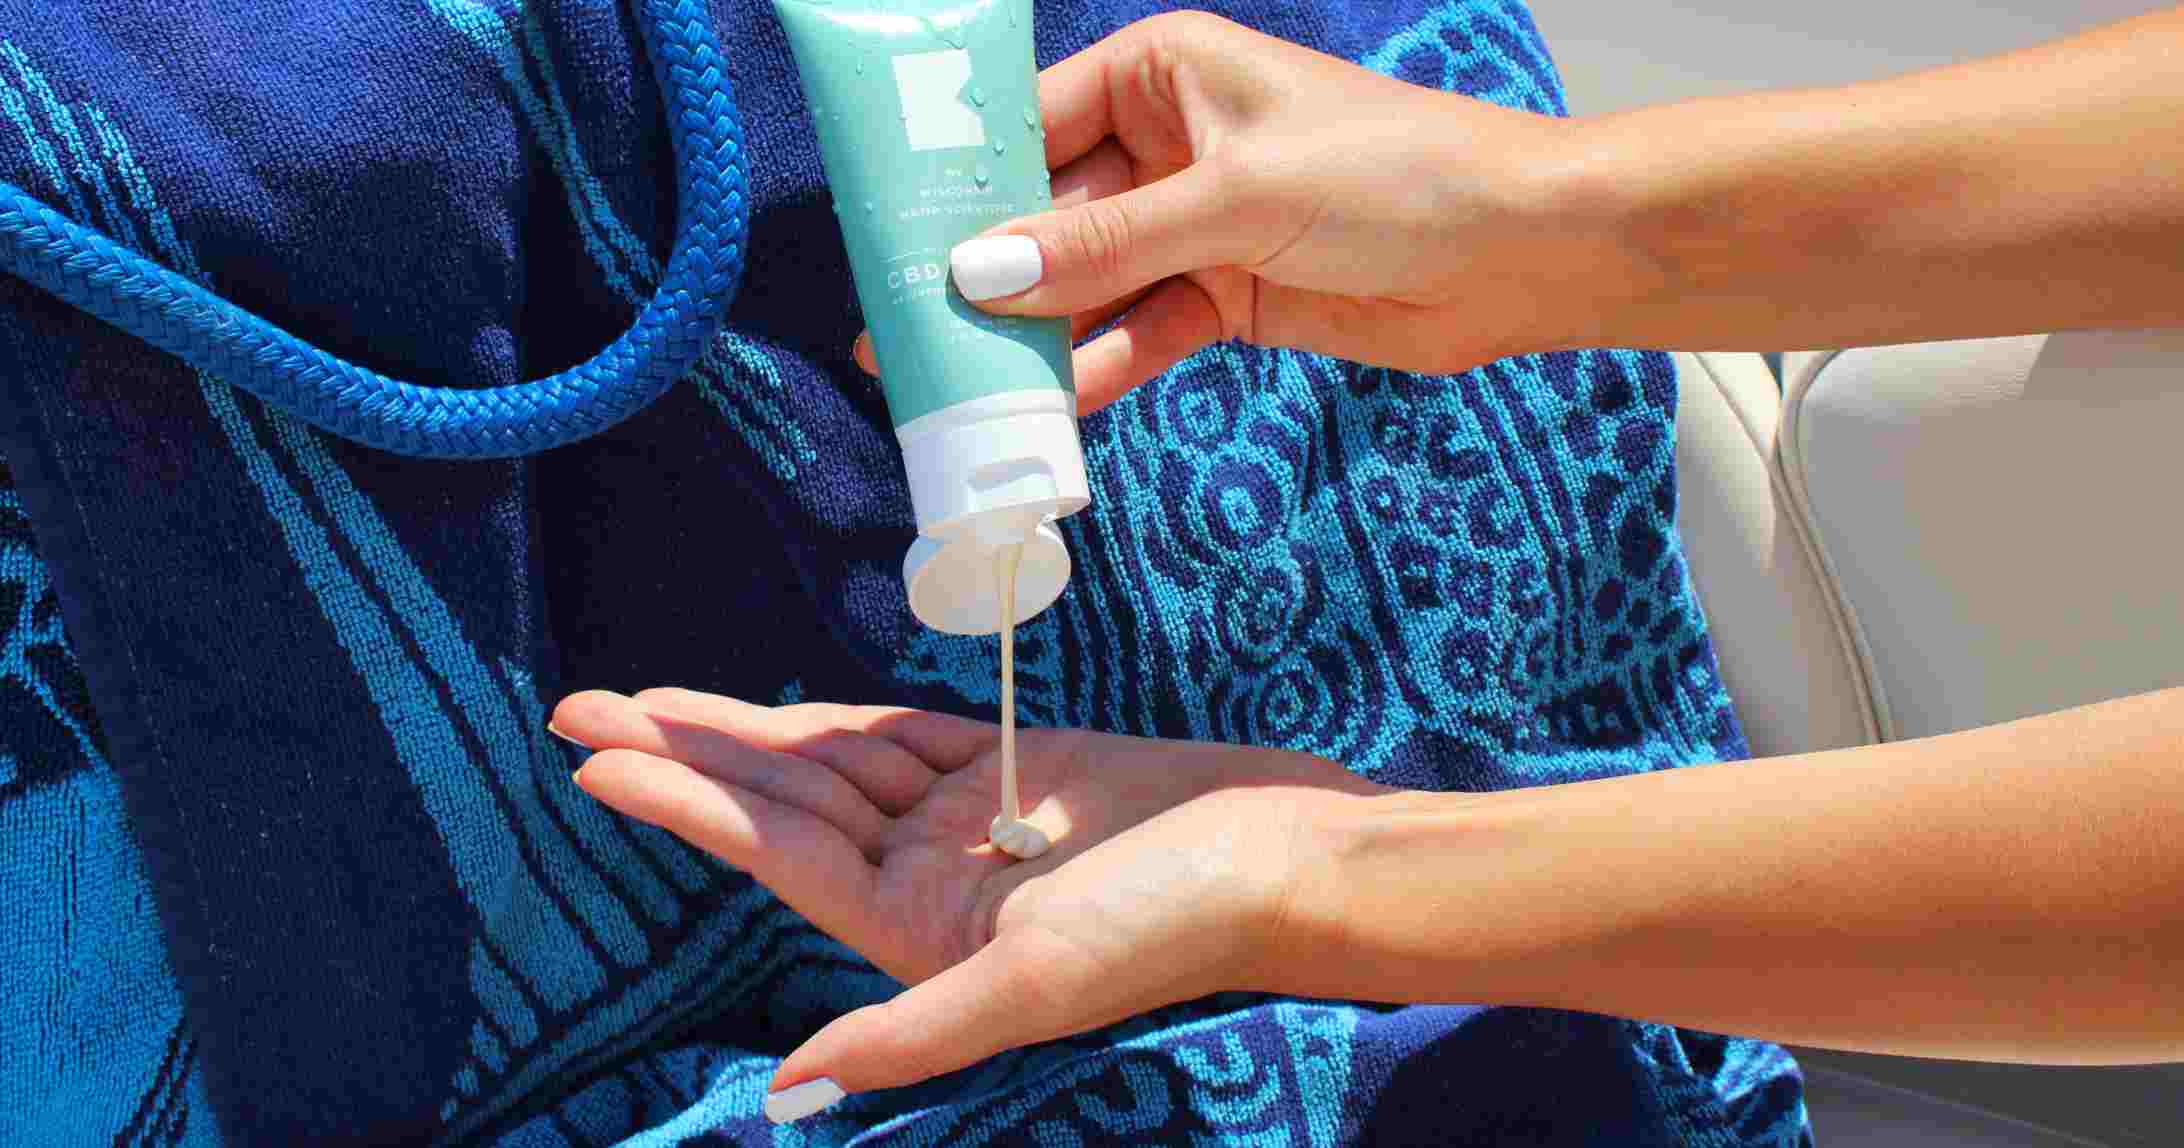 woman squeezing sunscreen product in her hand